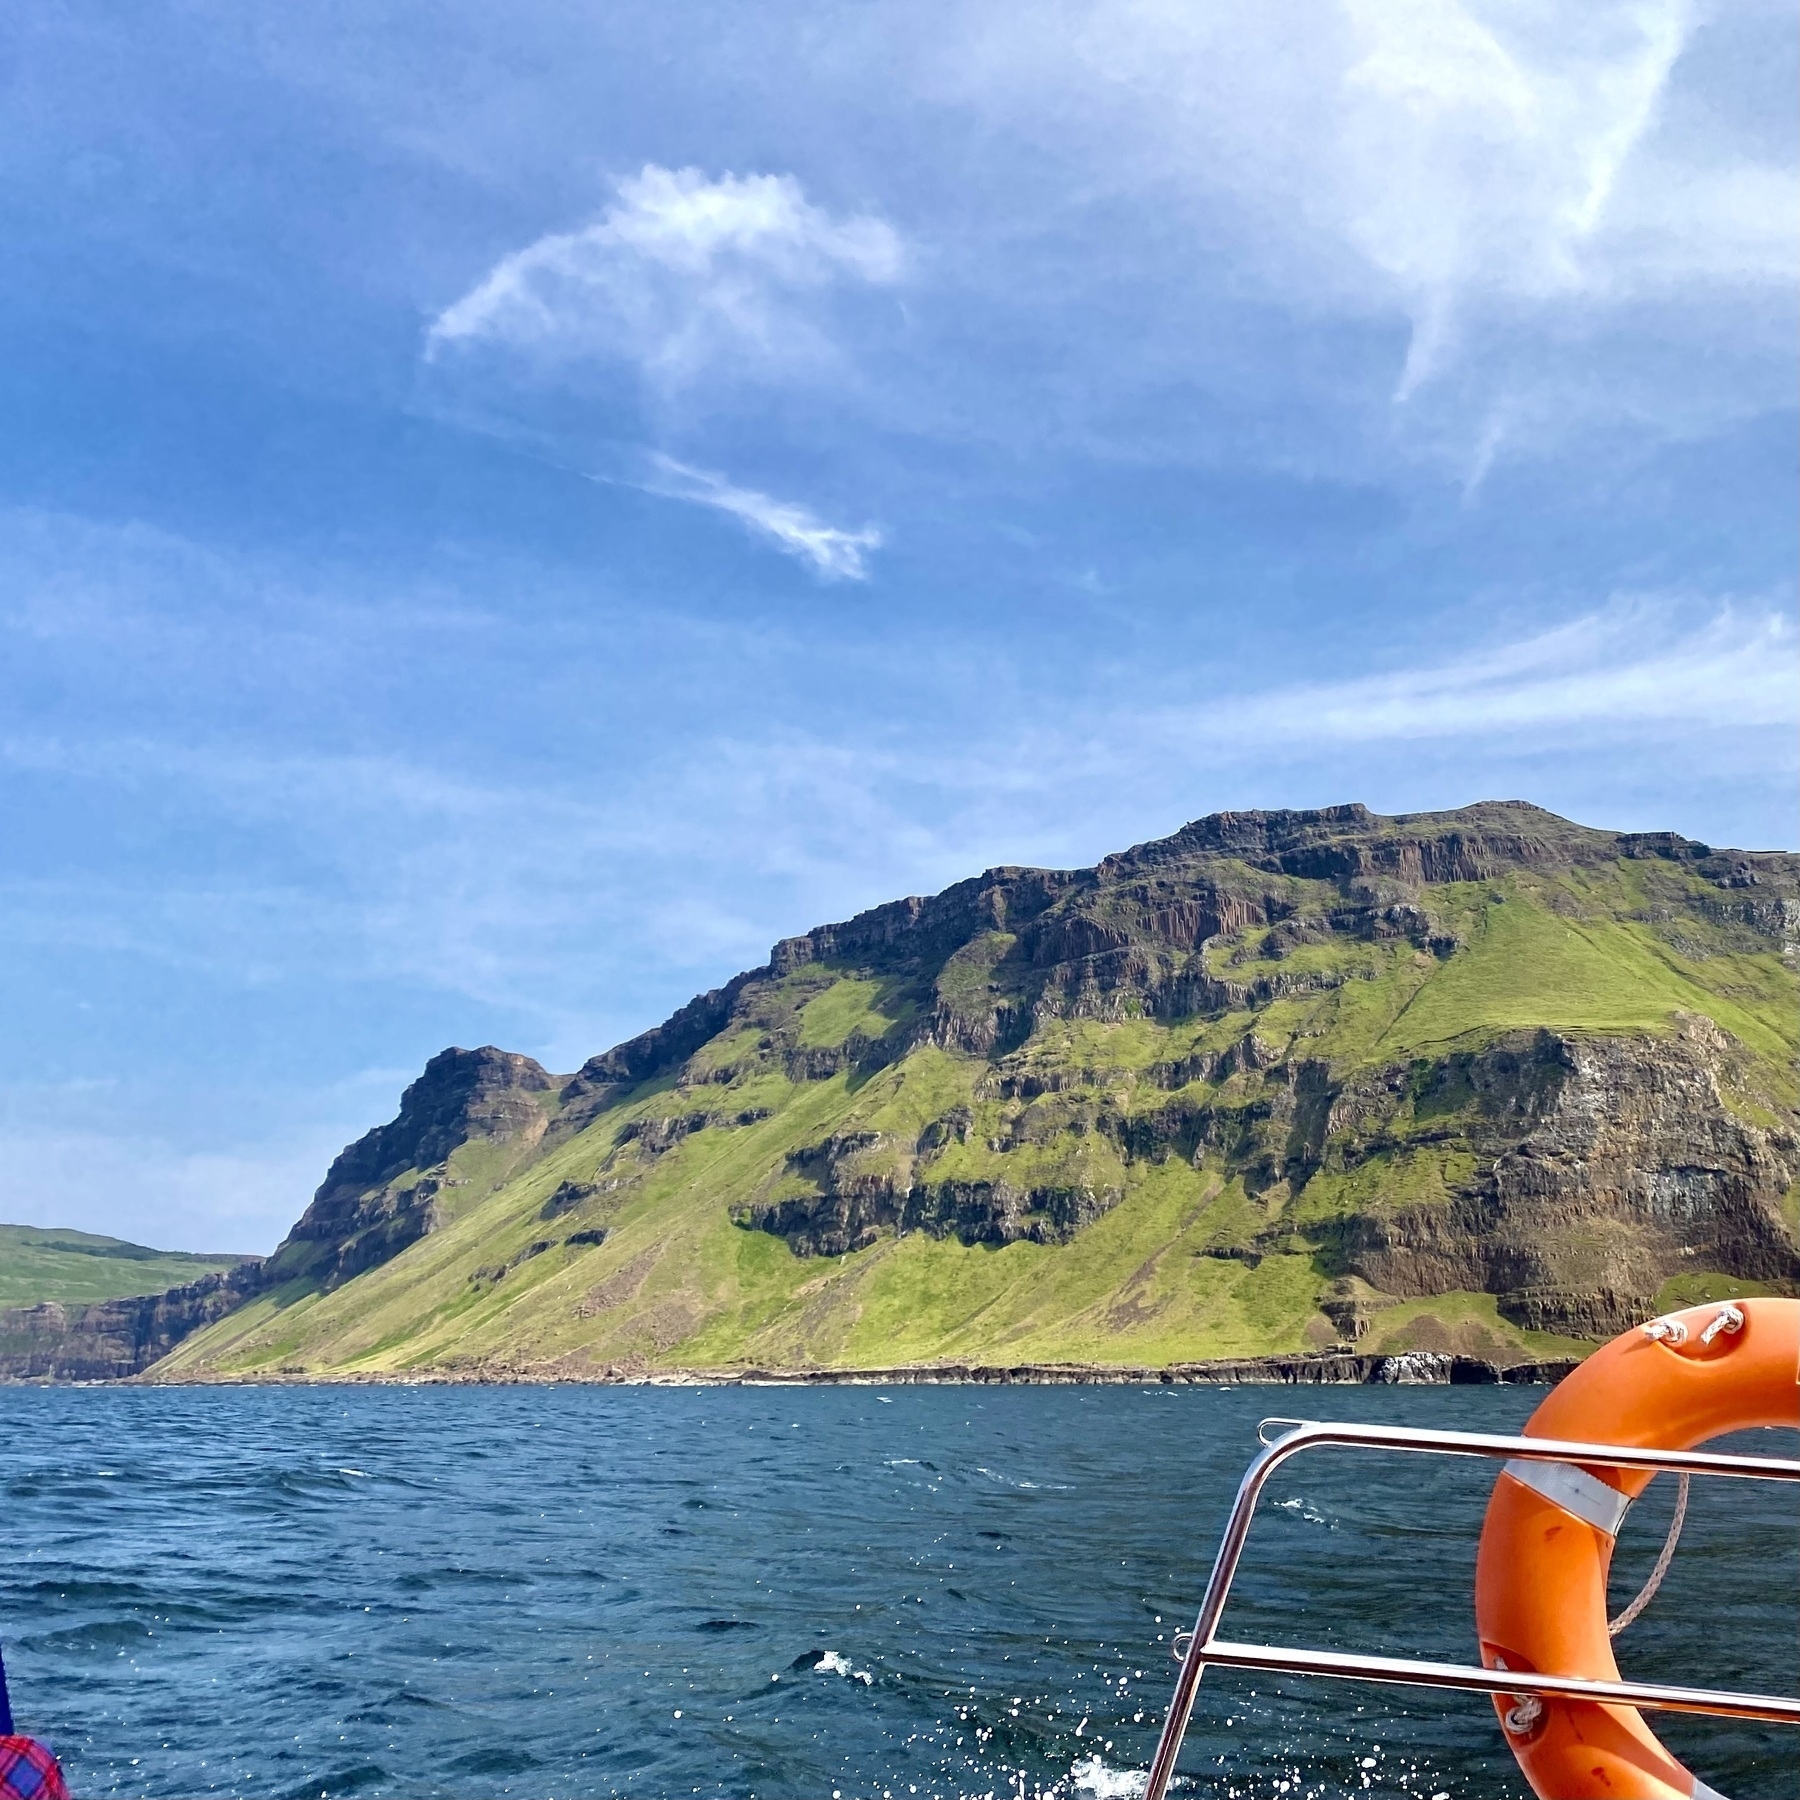 Photograph of the coastal cliffs of Mull taken from a small boat on a clear sunny day